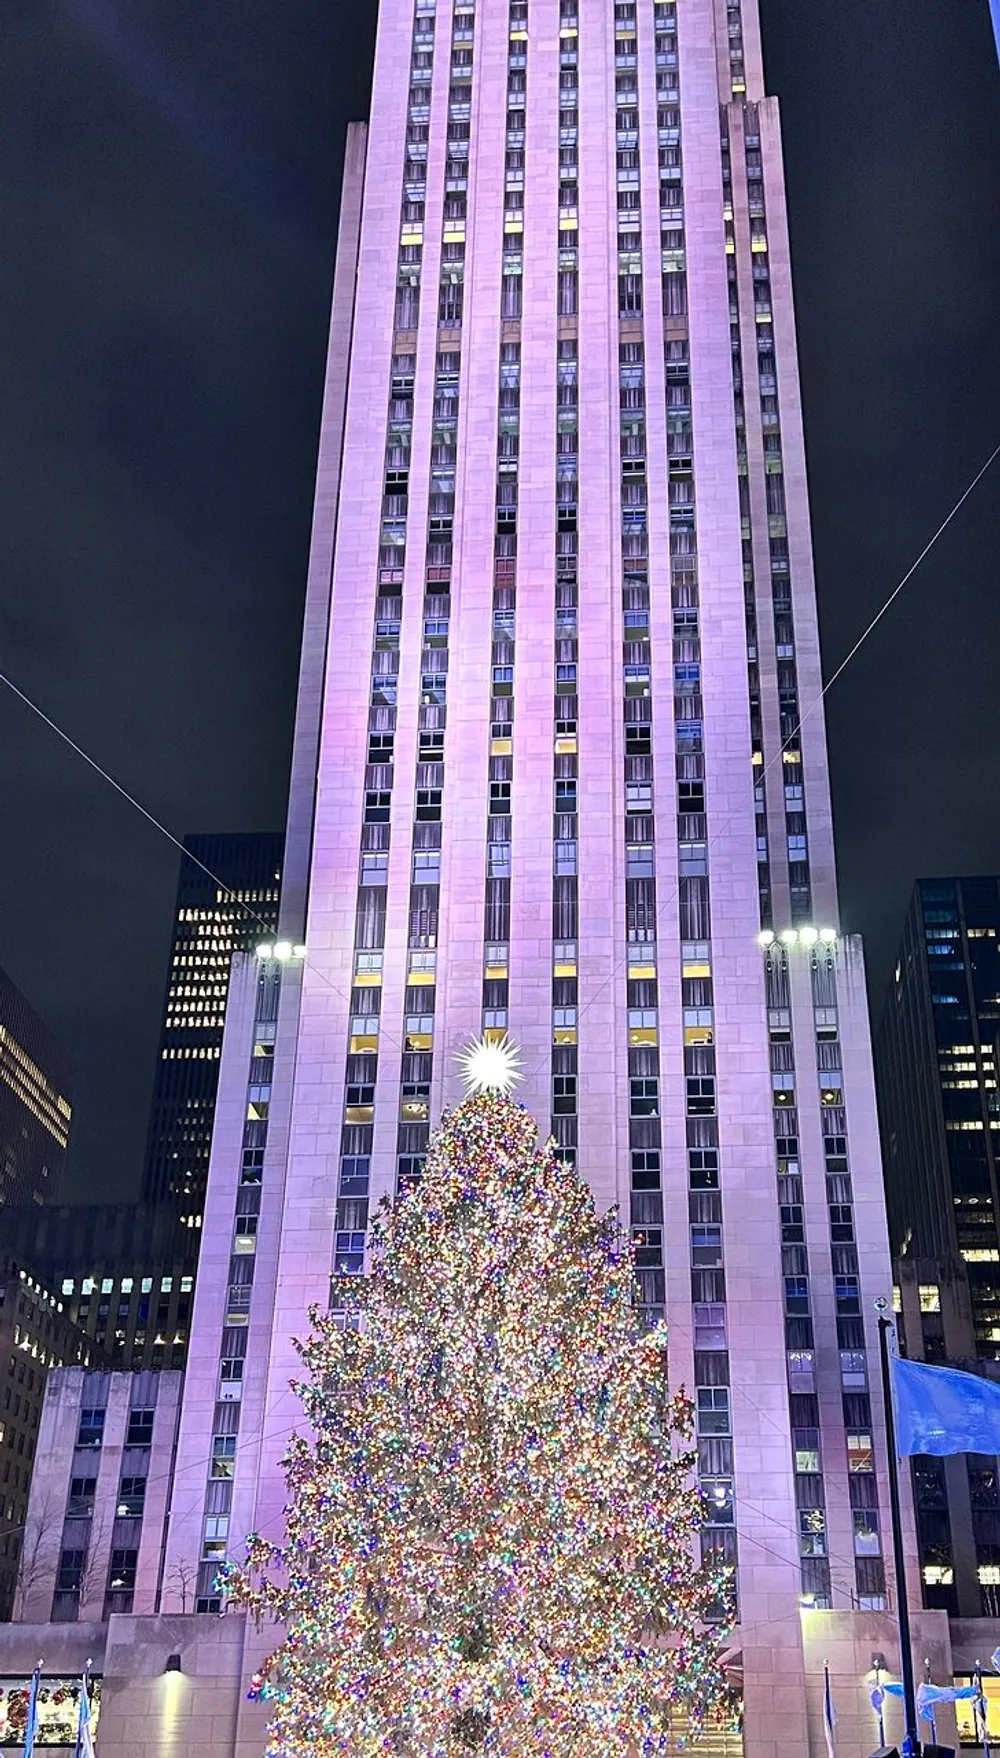 A large festively lit Christmas tree stands before a towering skyscraper illuminating the plaza at night